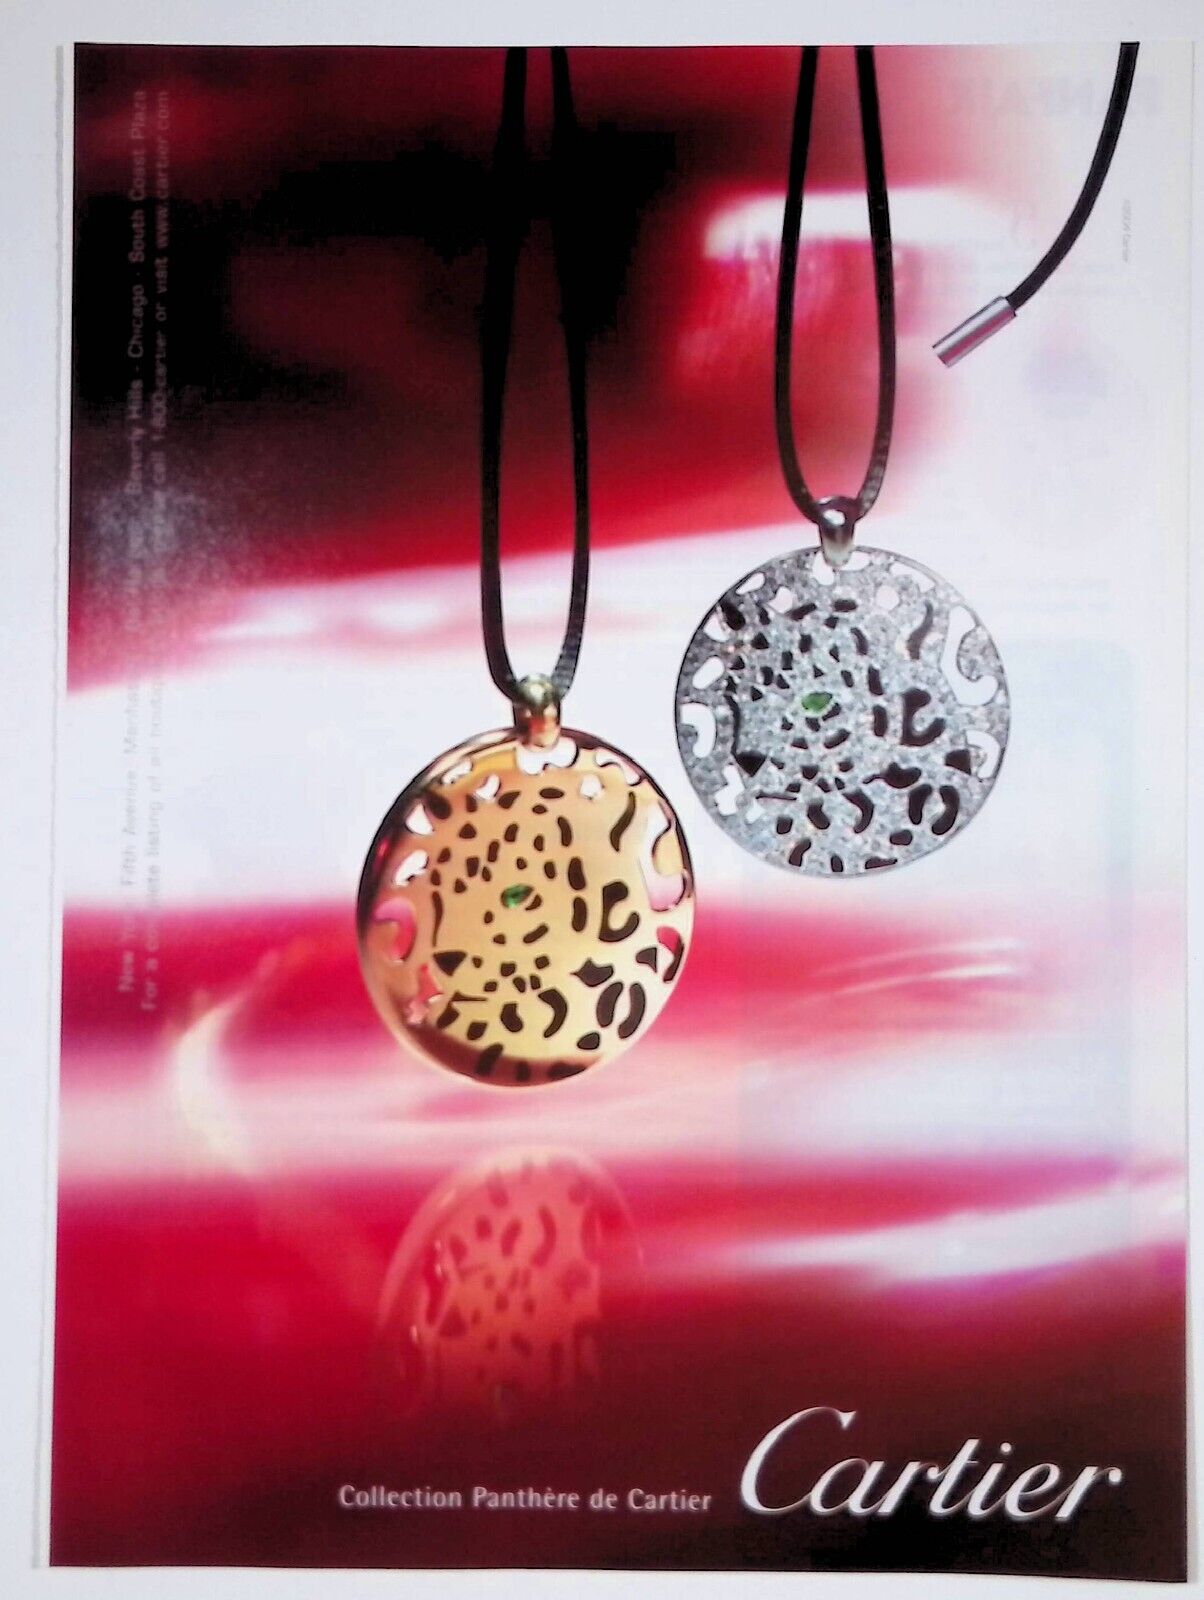 Cartier Collection Panthere Jewelry Print Ad Vanity Fair Magazine September 2004